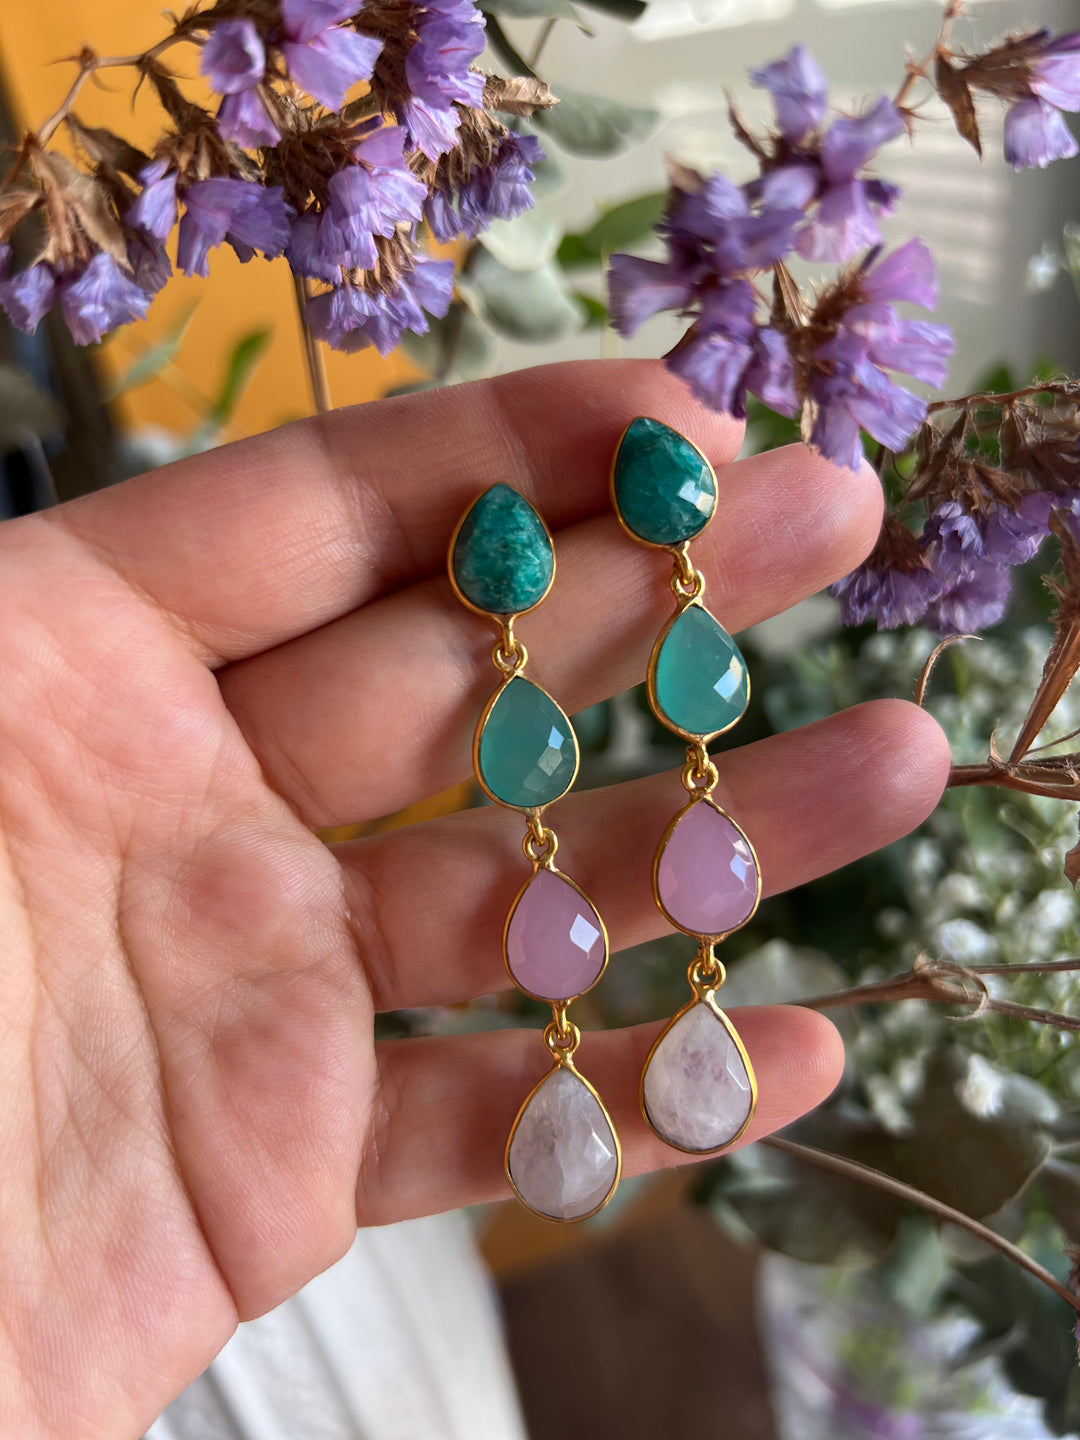 Earrings with Madame Verde, Aquamarine, Pink and Moon stones